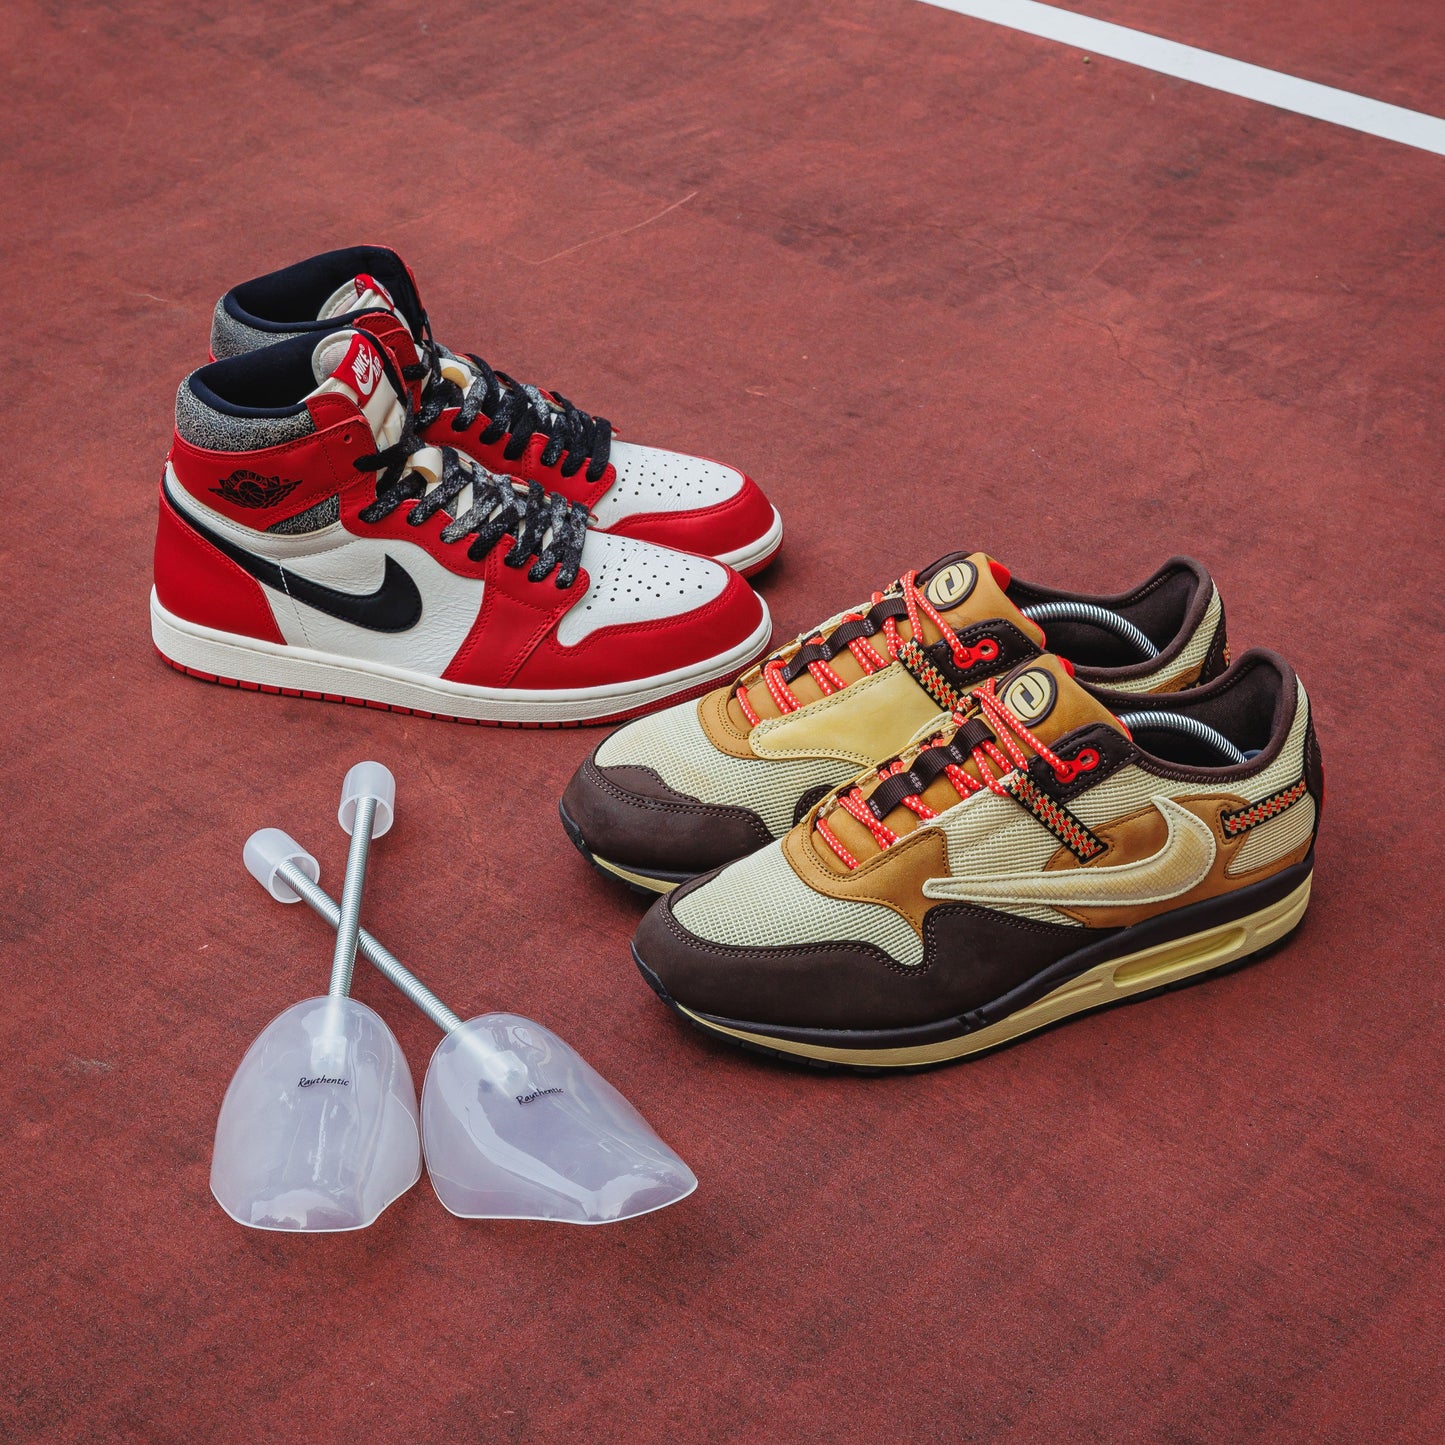 Shoe Trees For Sneakers